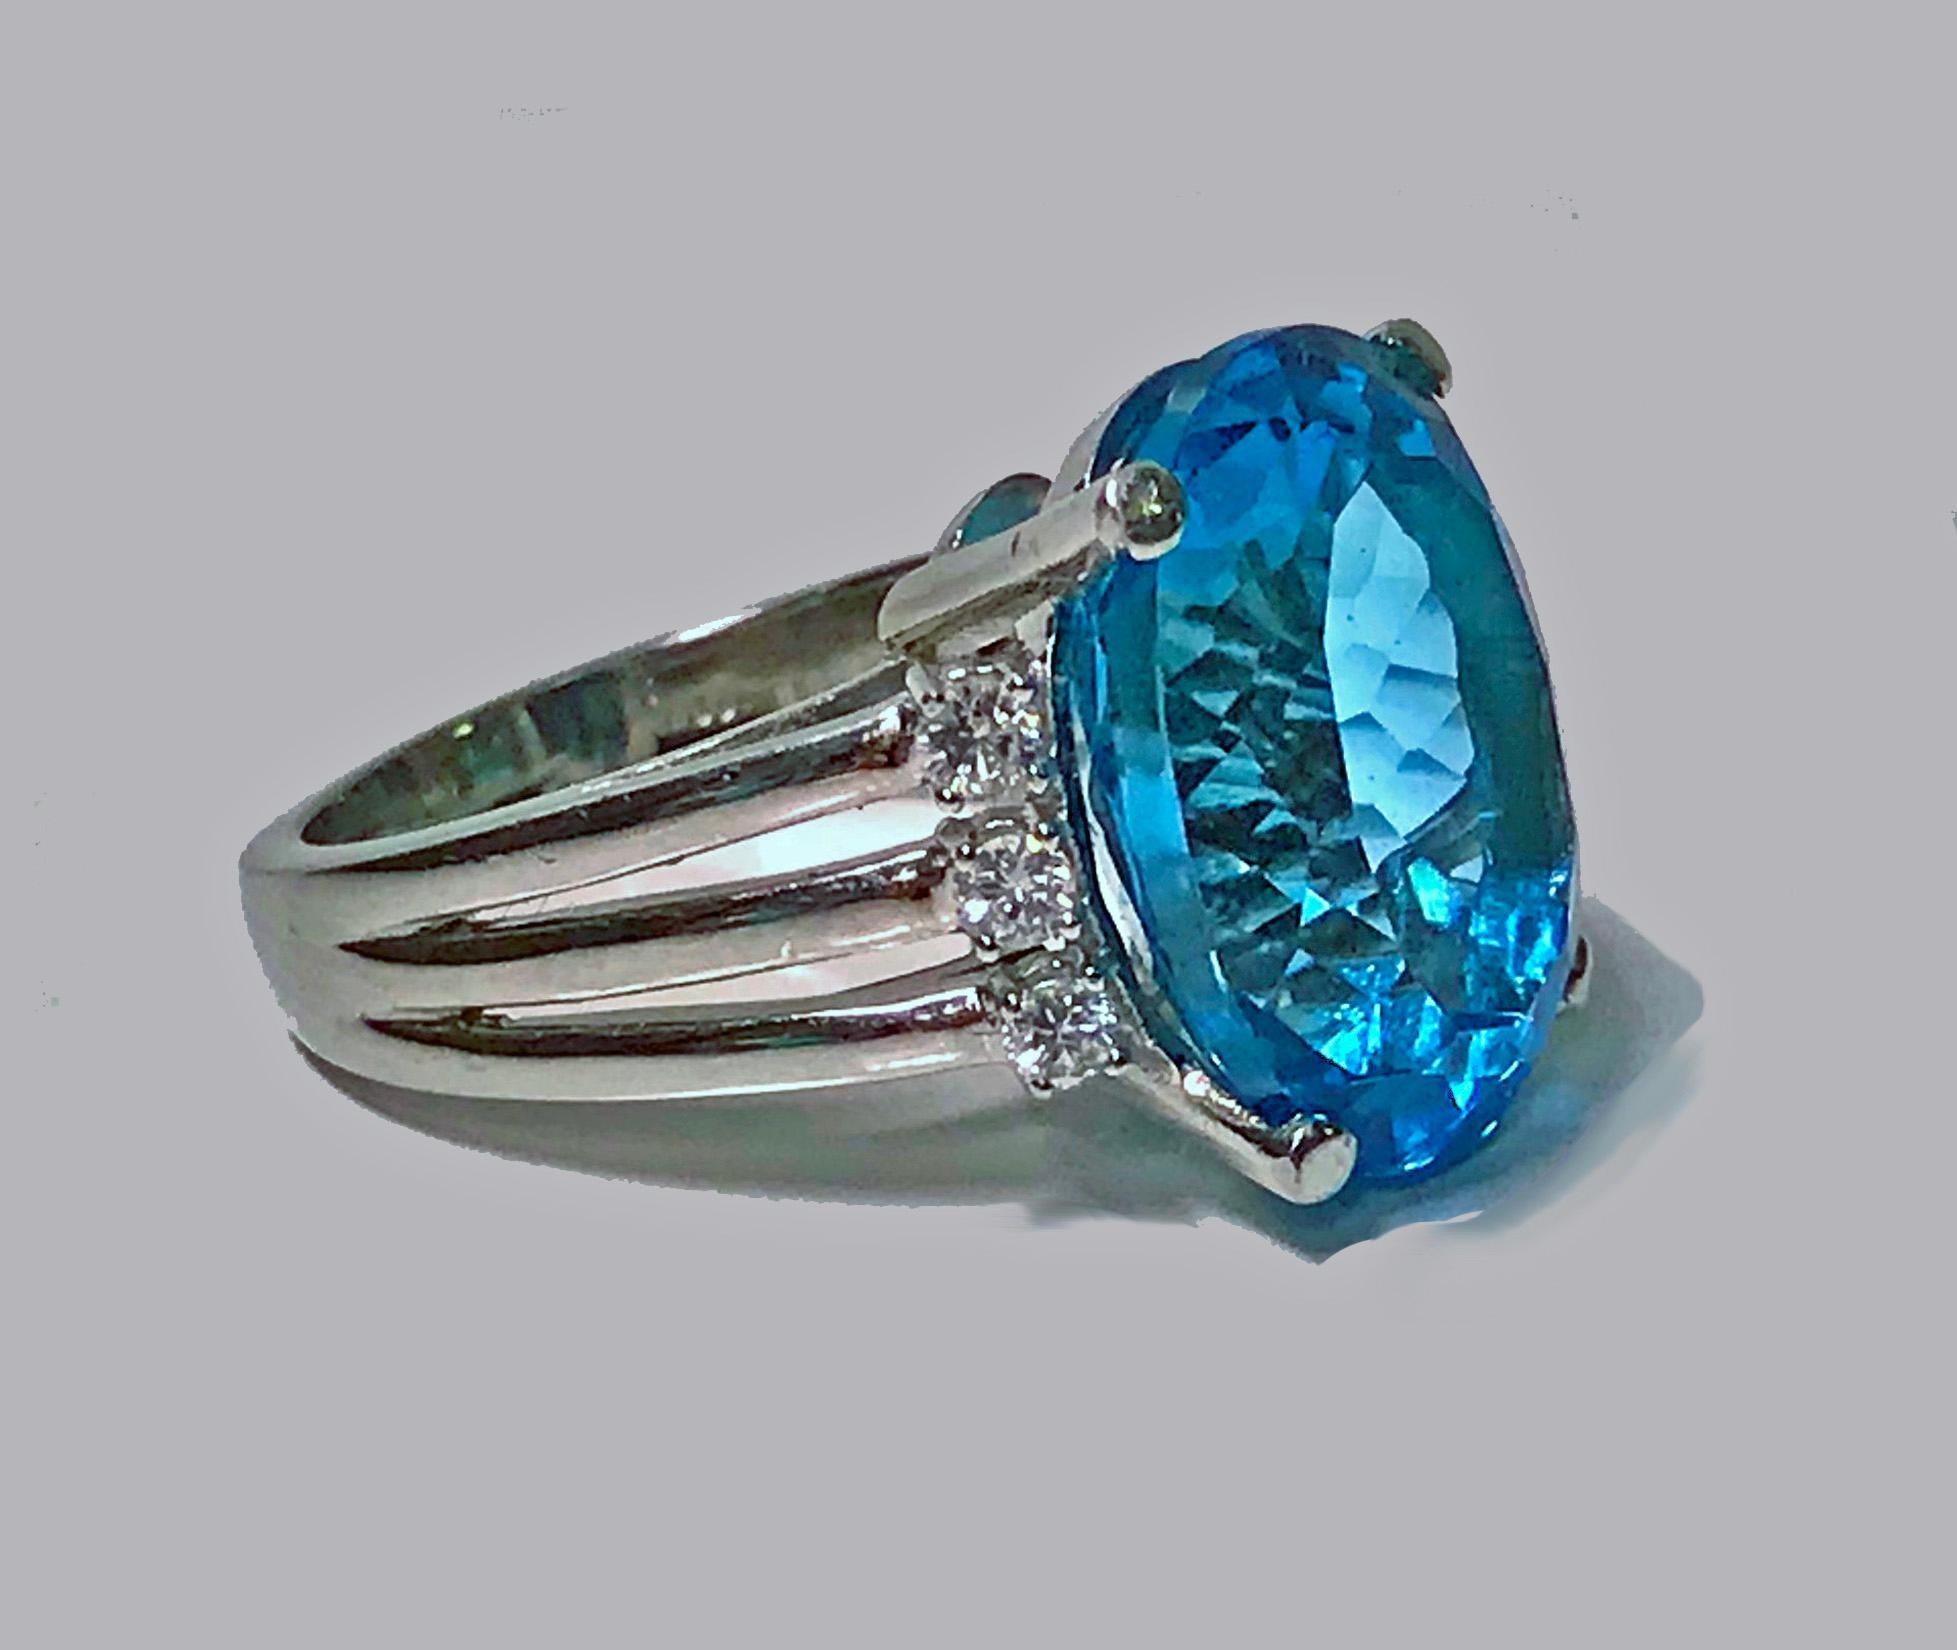 Topaz and Diamond Ring, 20th century. The Ring set with an oval facetted dark tone, very strong intensity blue topaz, gauging 15.95 x 12.00 x 9.00 mm, 13.50 cts, VVS clarity (type 1), flanked with six round brilliant cut diamonds, approximately 0.30